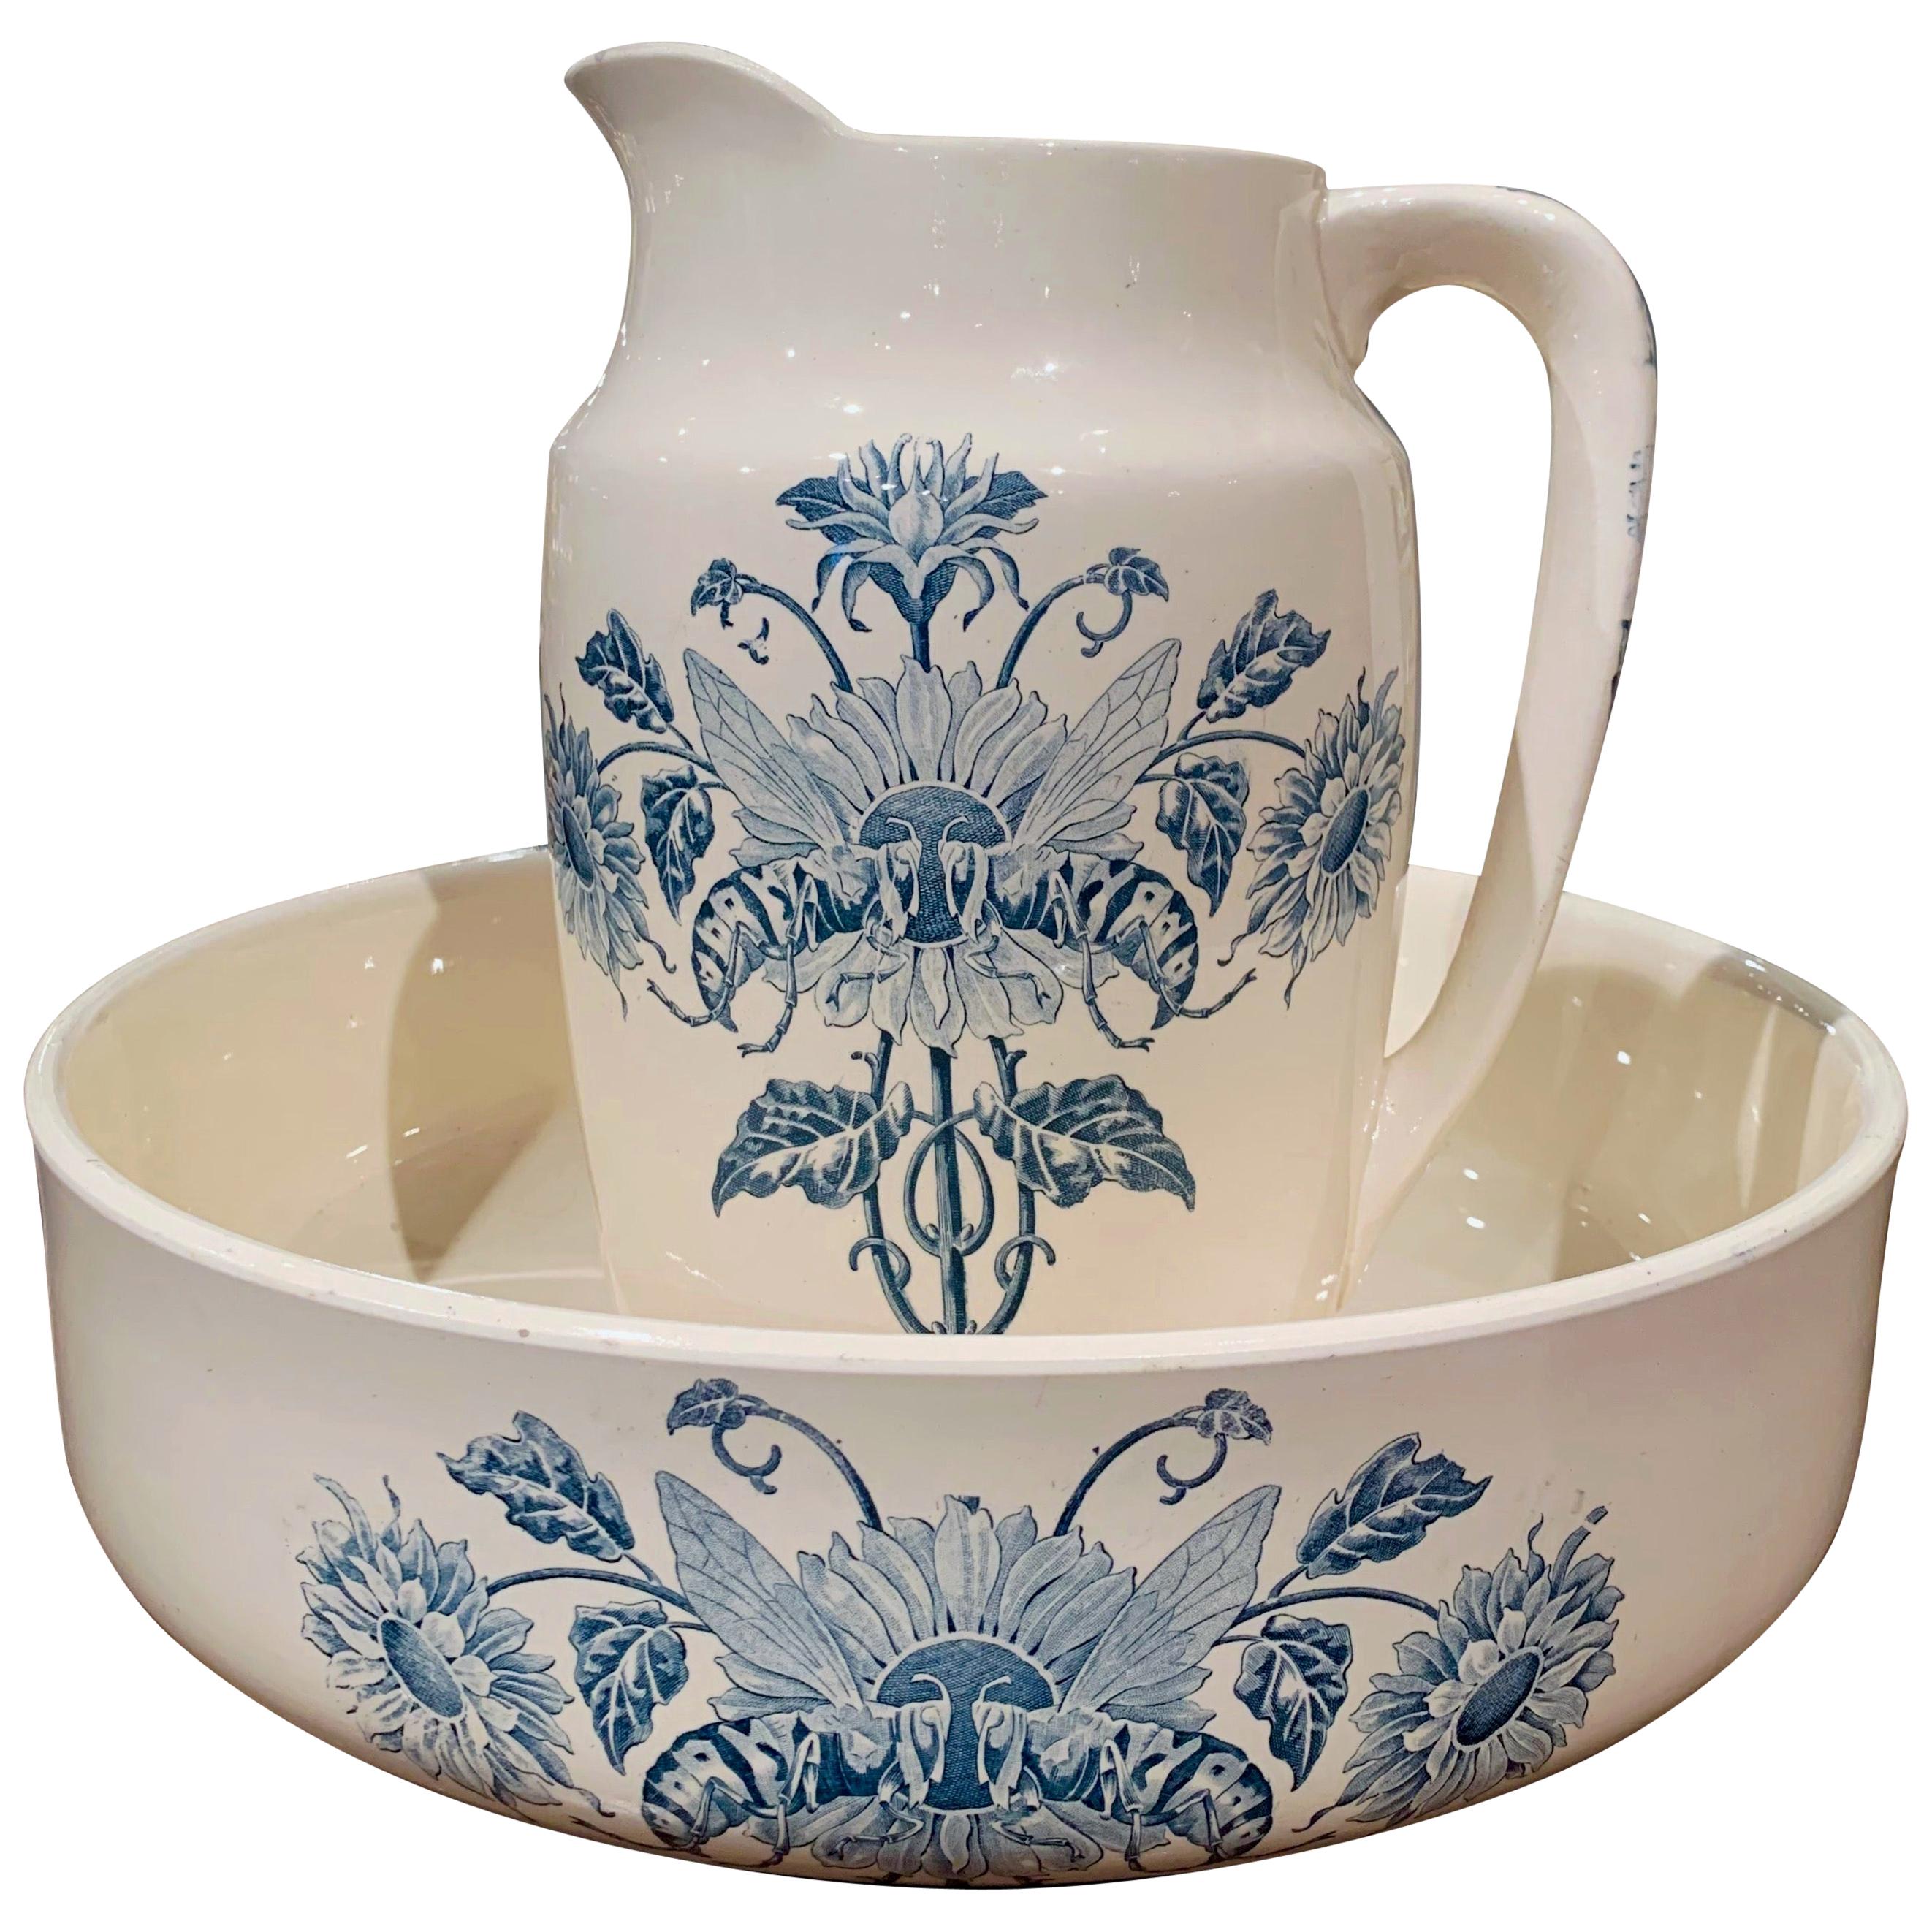 19th Century French Hand Painted Ceramic Wash Bowl and Pitcher from Longchamp